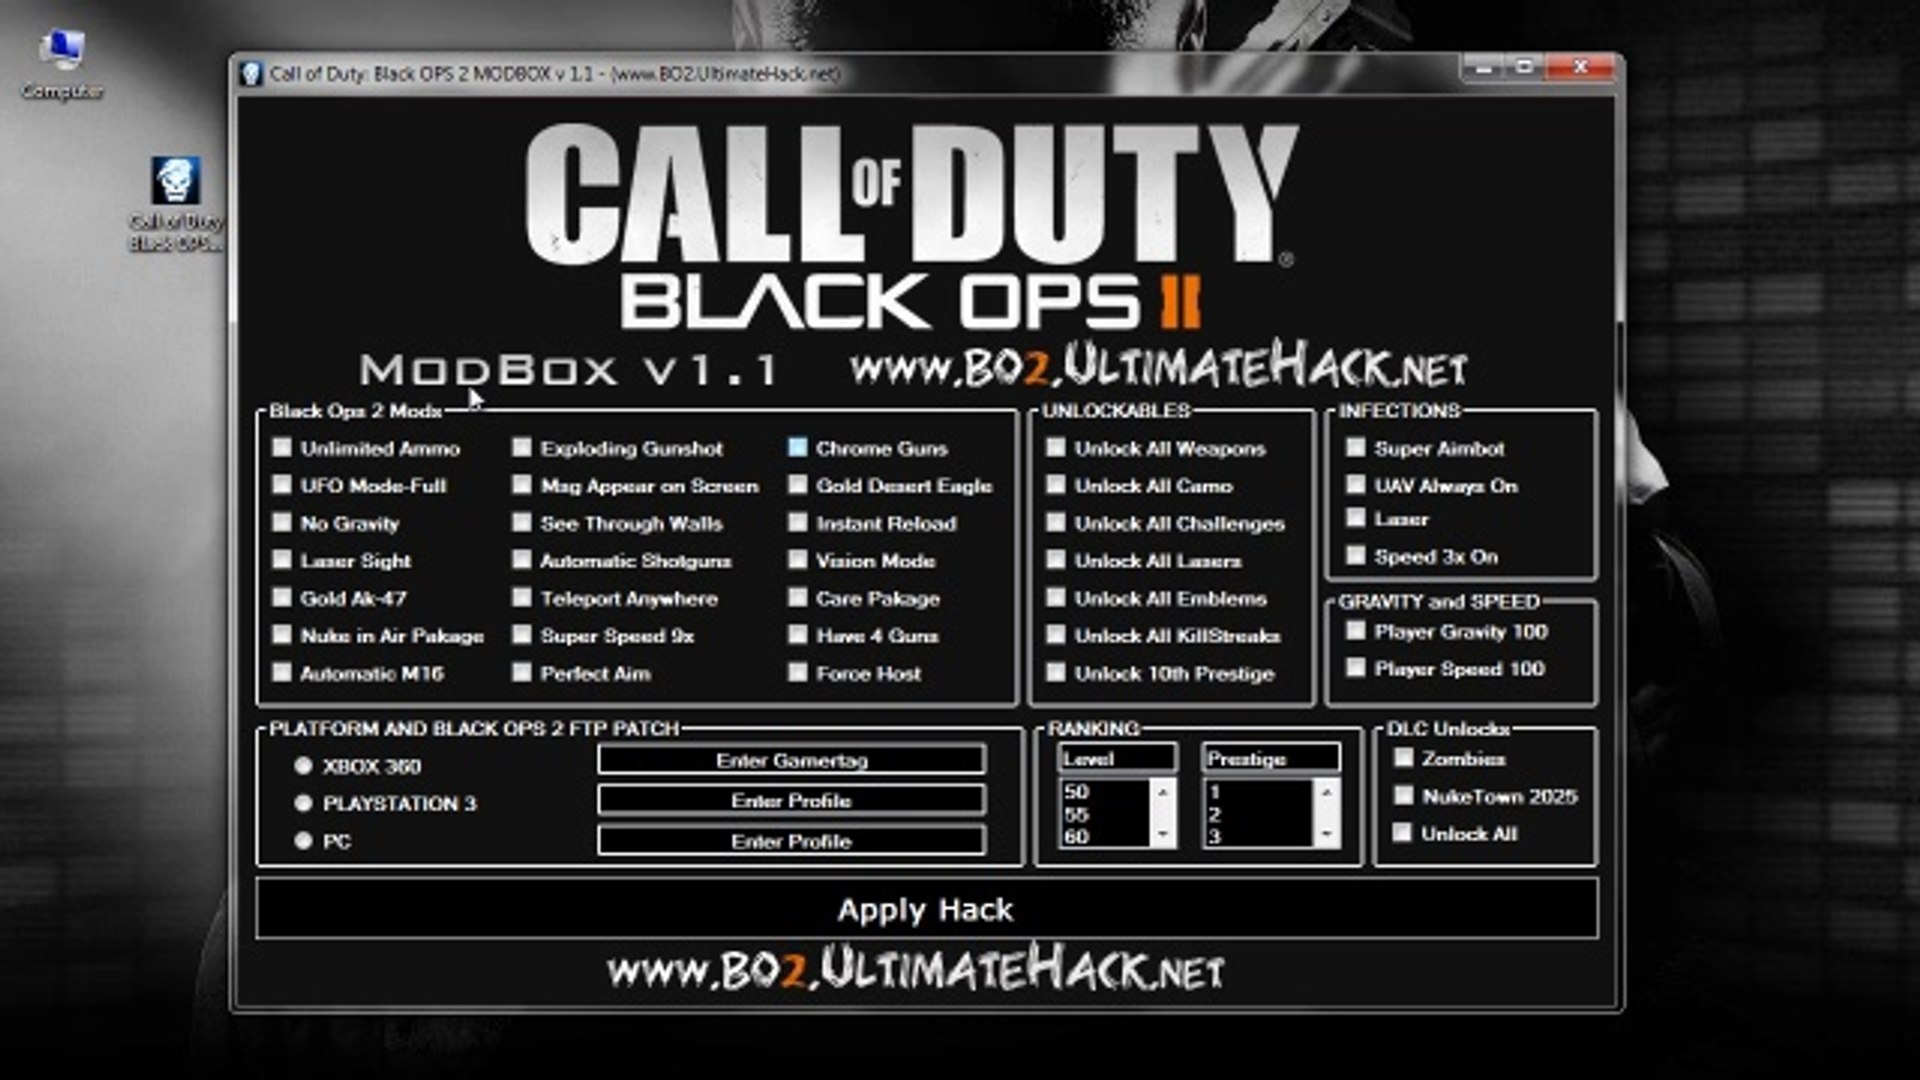 Call Of Duty Black Ops 2 MODS | Prestige, Aimbot, Wallhack Tutorial - video  Dailymotion